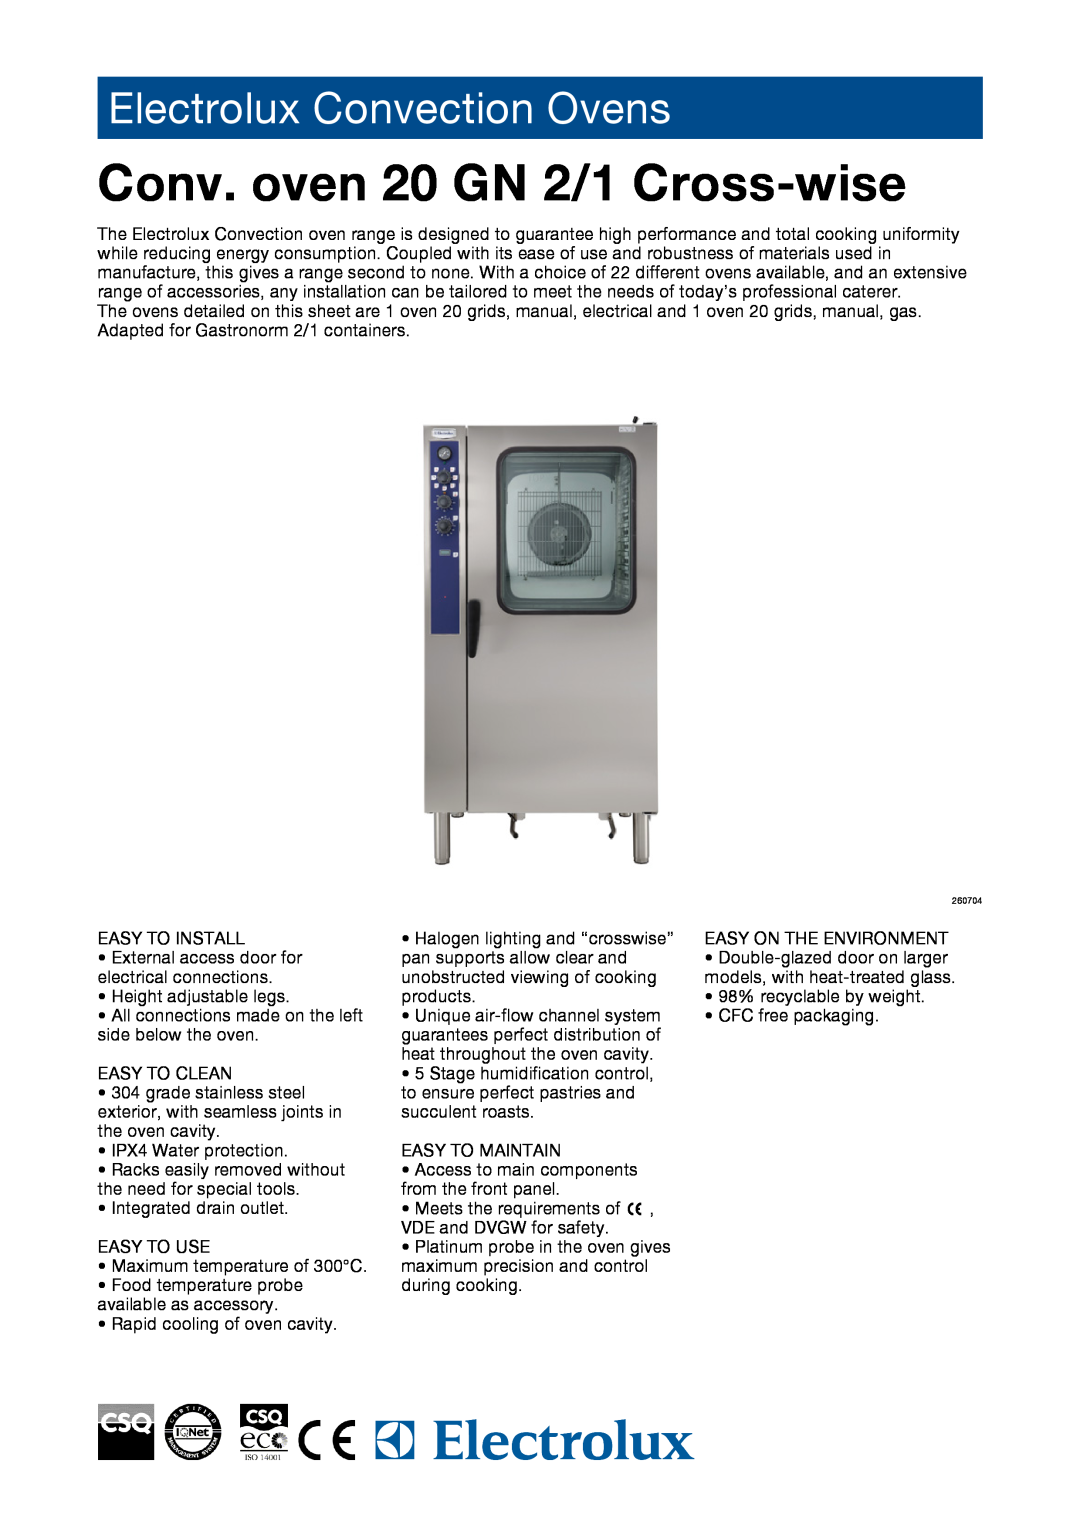 Electrolux FCE202, FCG202, 260704, 260709 manual Conv. oven 20 GN 2/1 Cross-wise, Electrolux Convection Ovens 